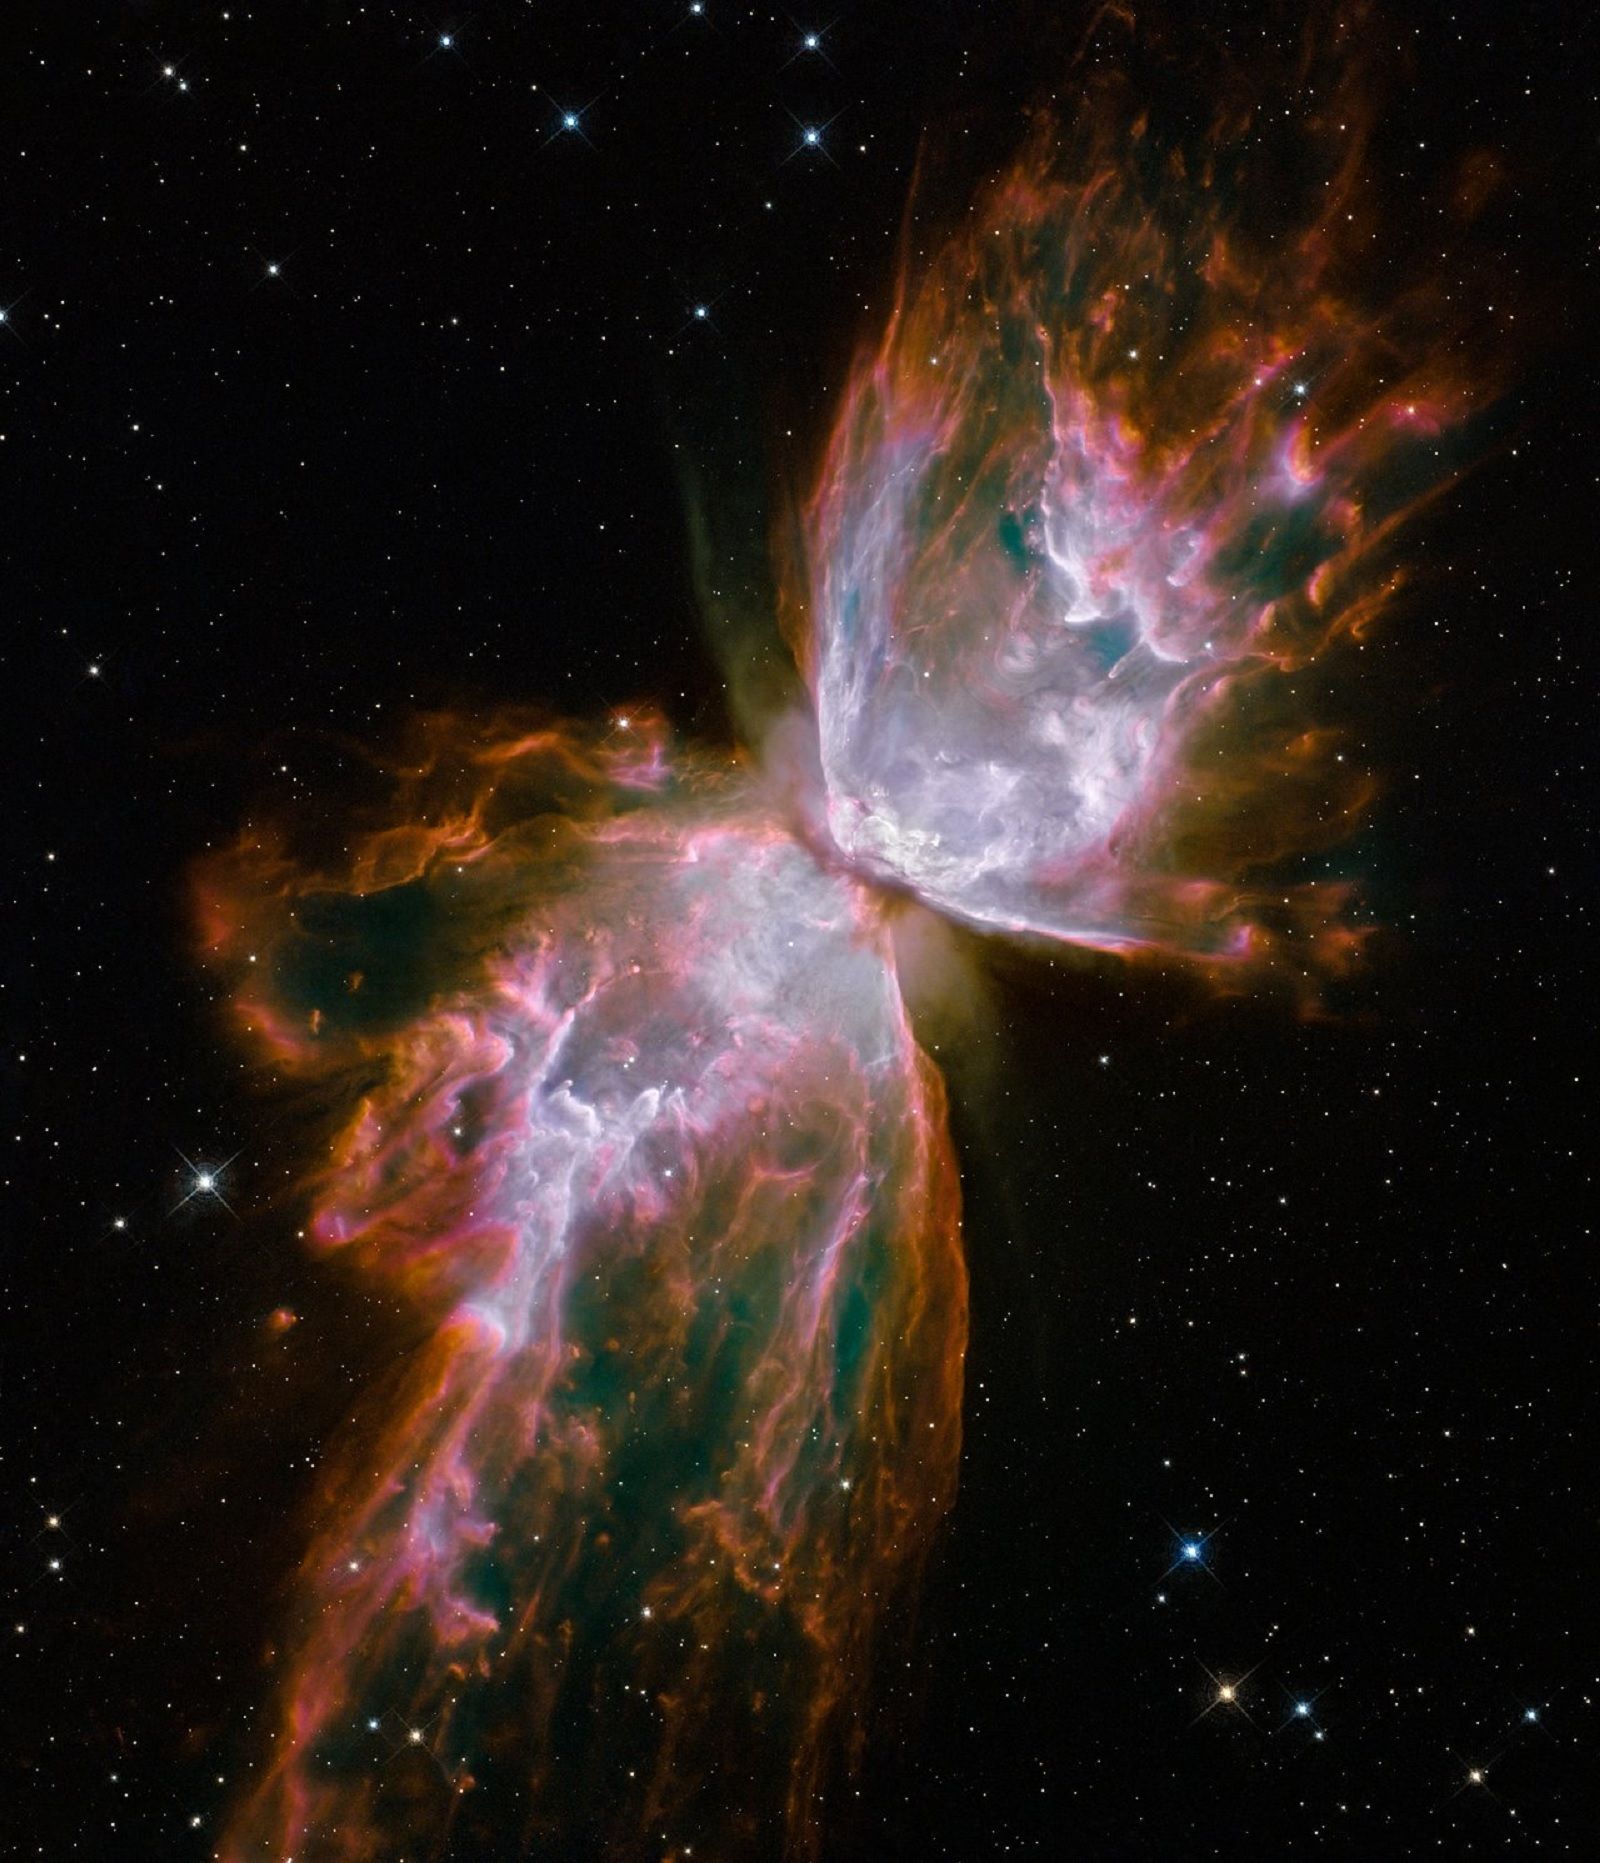 astounding images from the depths of the universe courtesy of the hubble space telescope photo 29